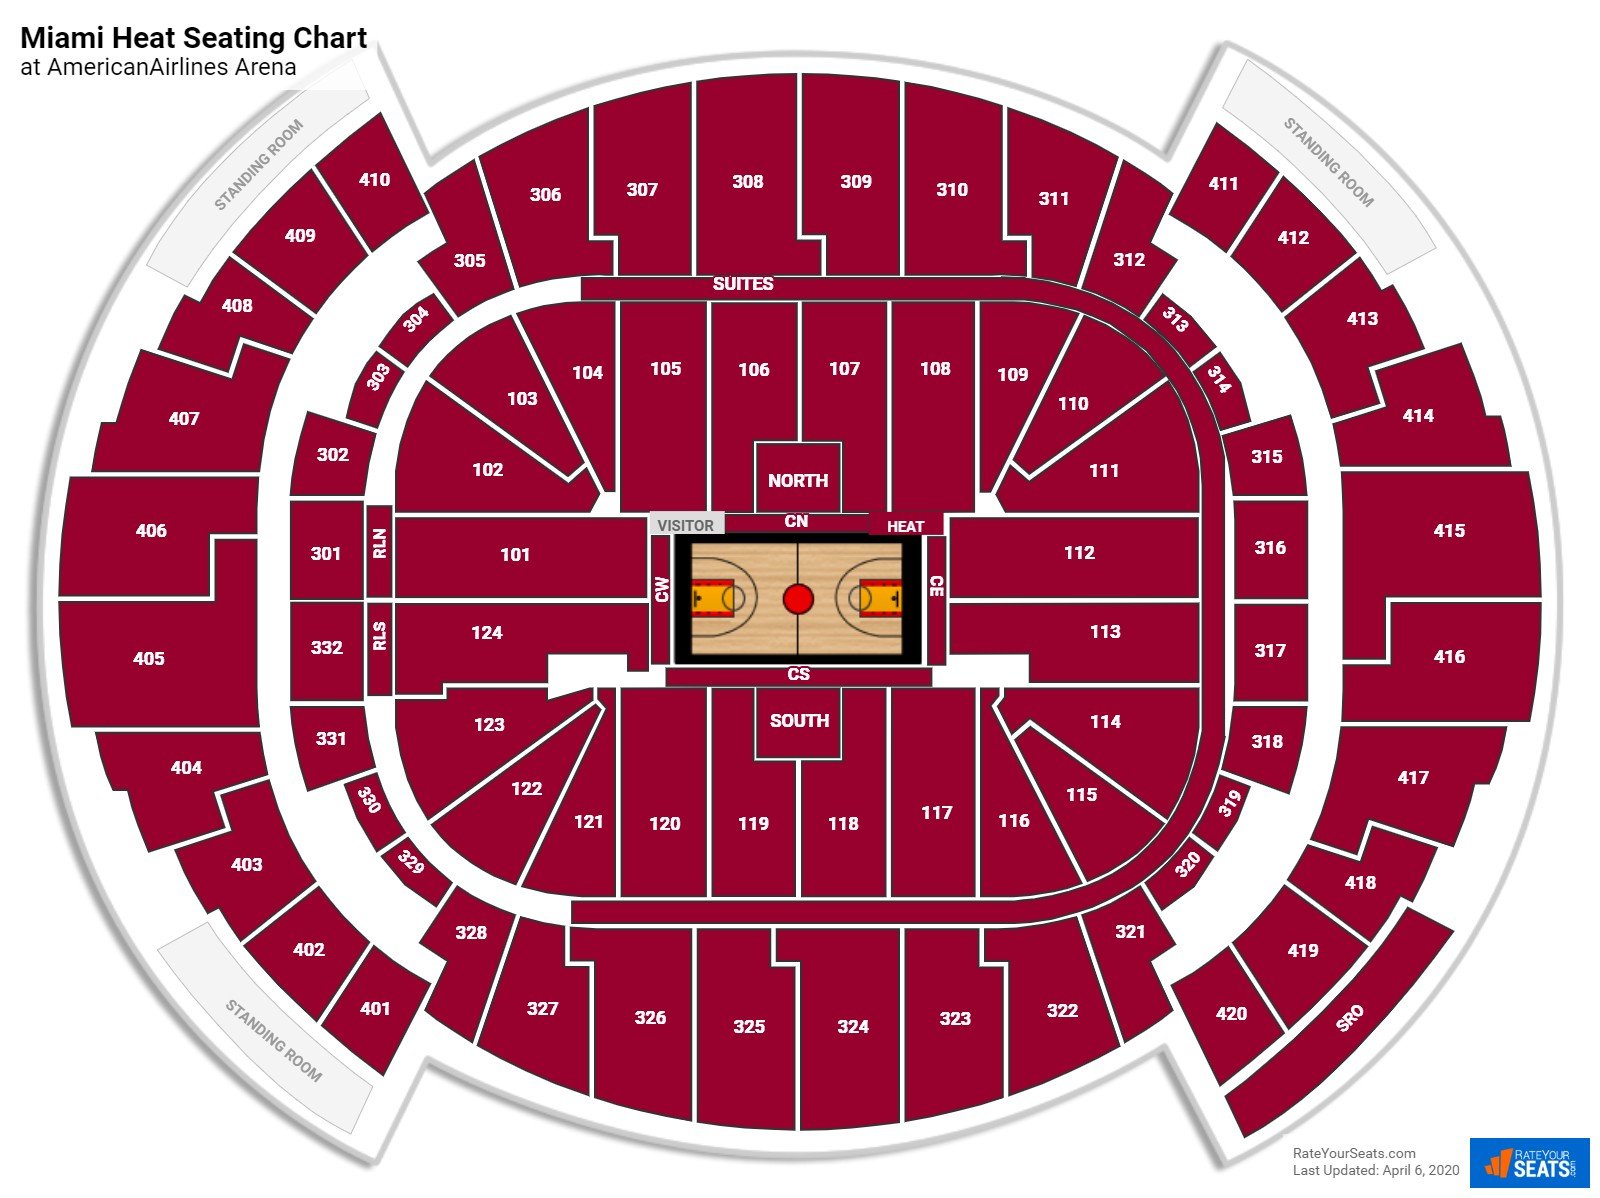 Miami Heat Seating Charts At Ftx Arena Rateyourseats Com